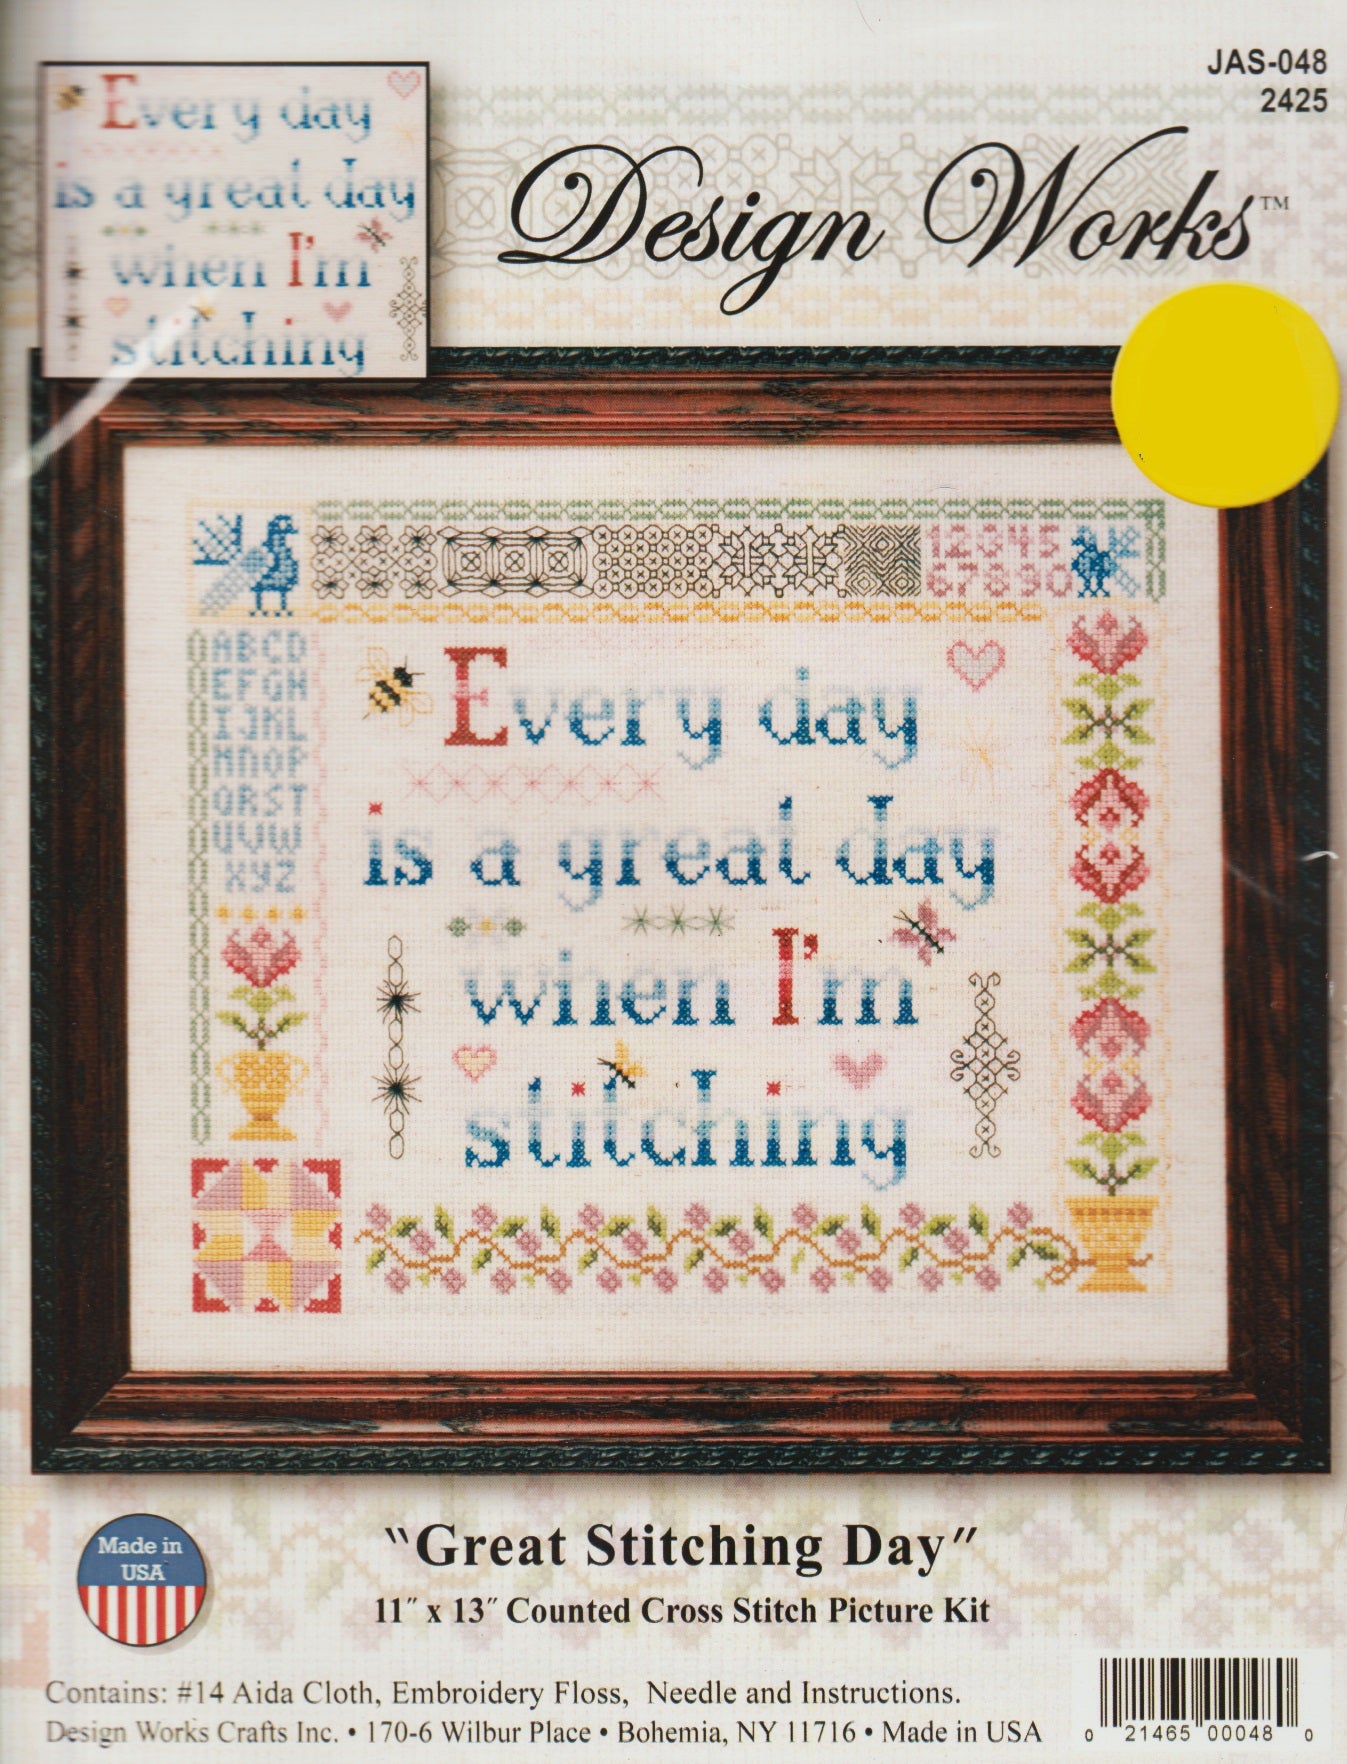 We have a wide selection of new and gently used Cross Stitch items 